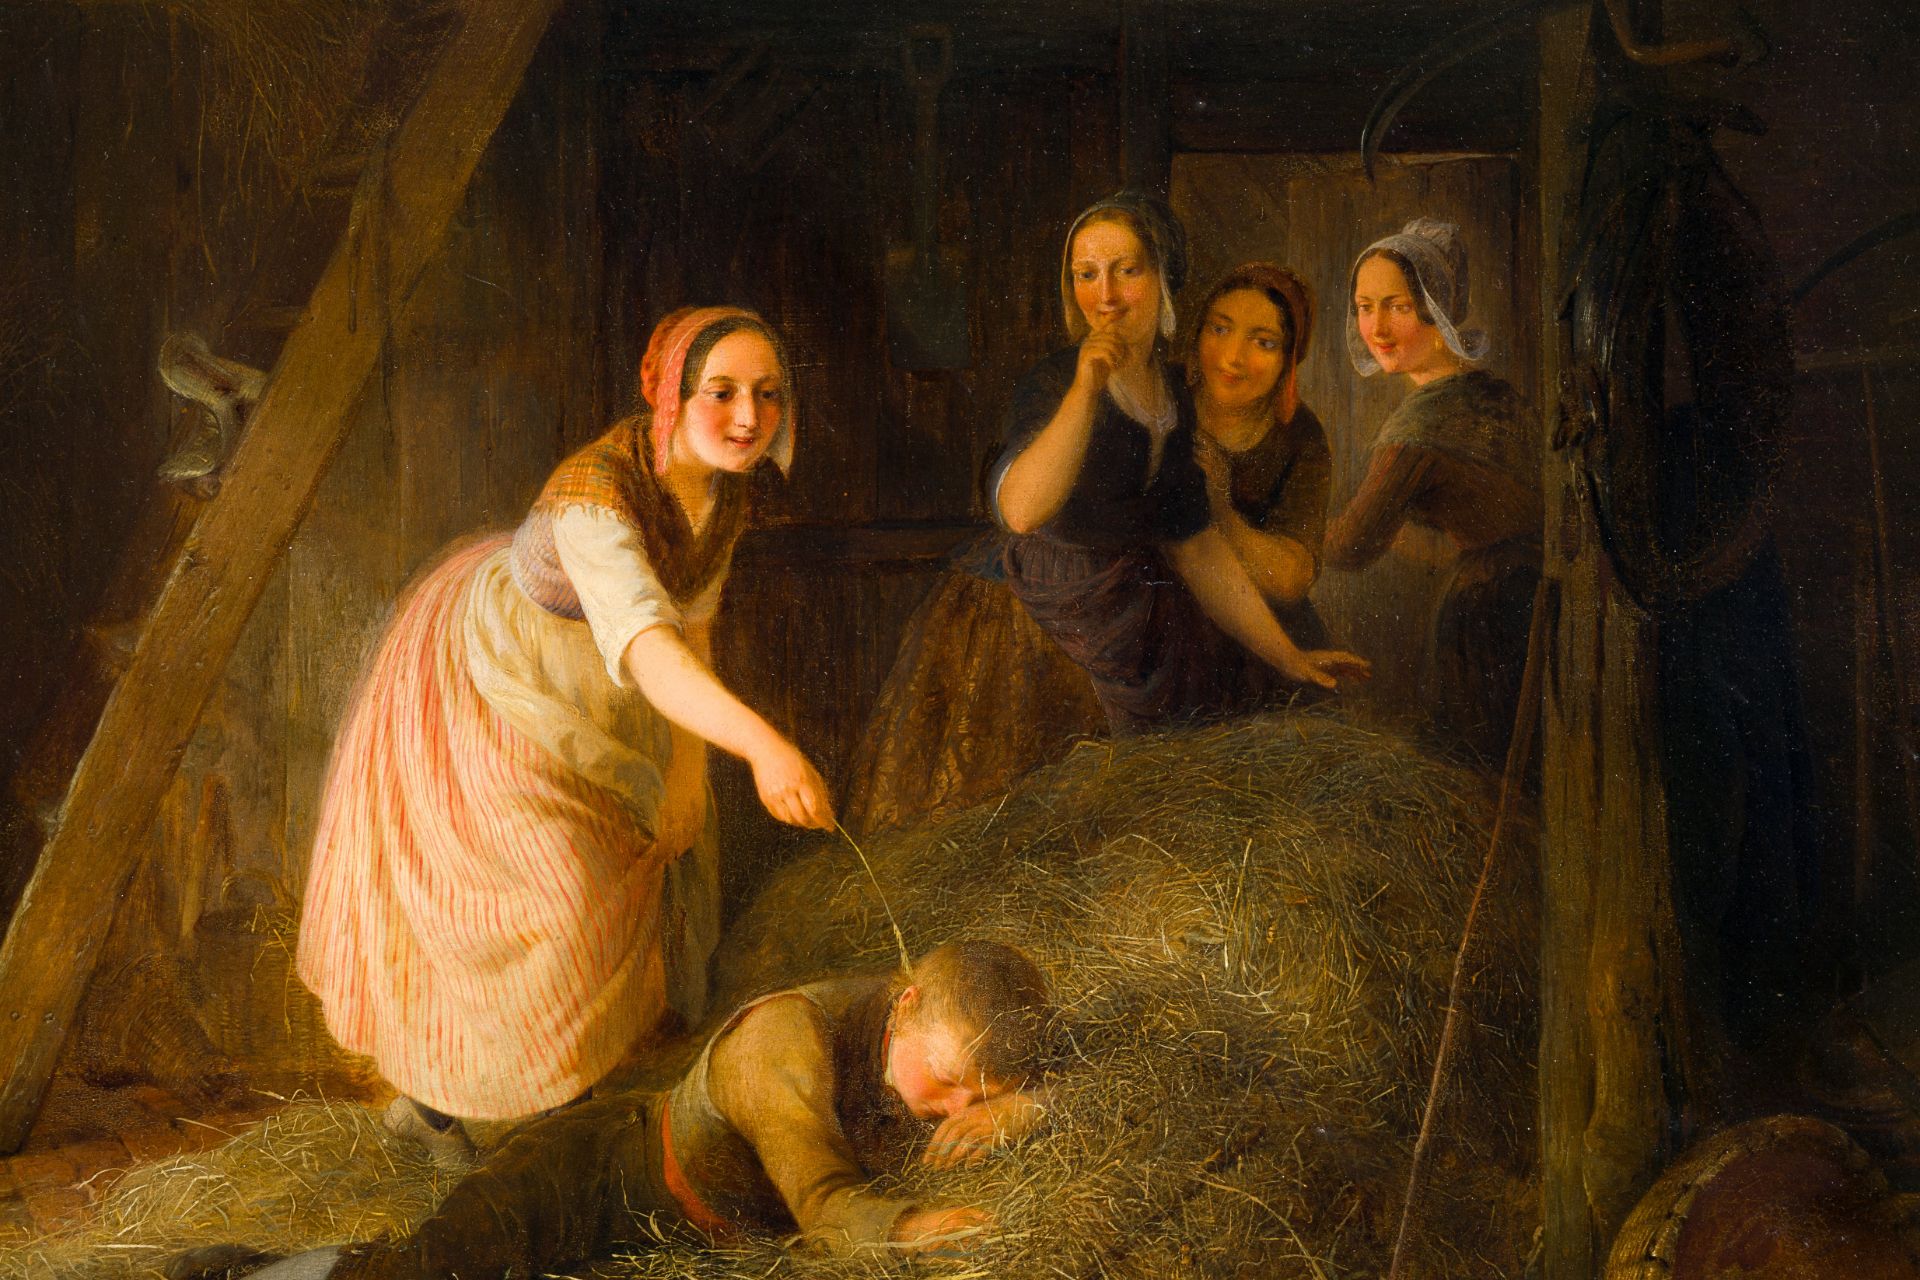 Ferdinand I De Braekeleer (1792-1883): Boy sleeping in the hay in a stable being teased by four girl - Image 4 of 5